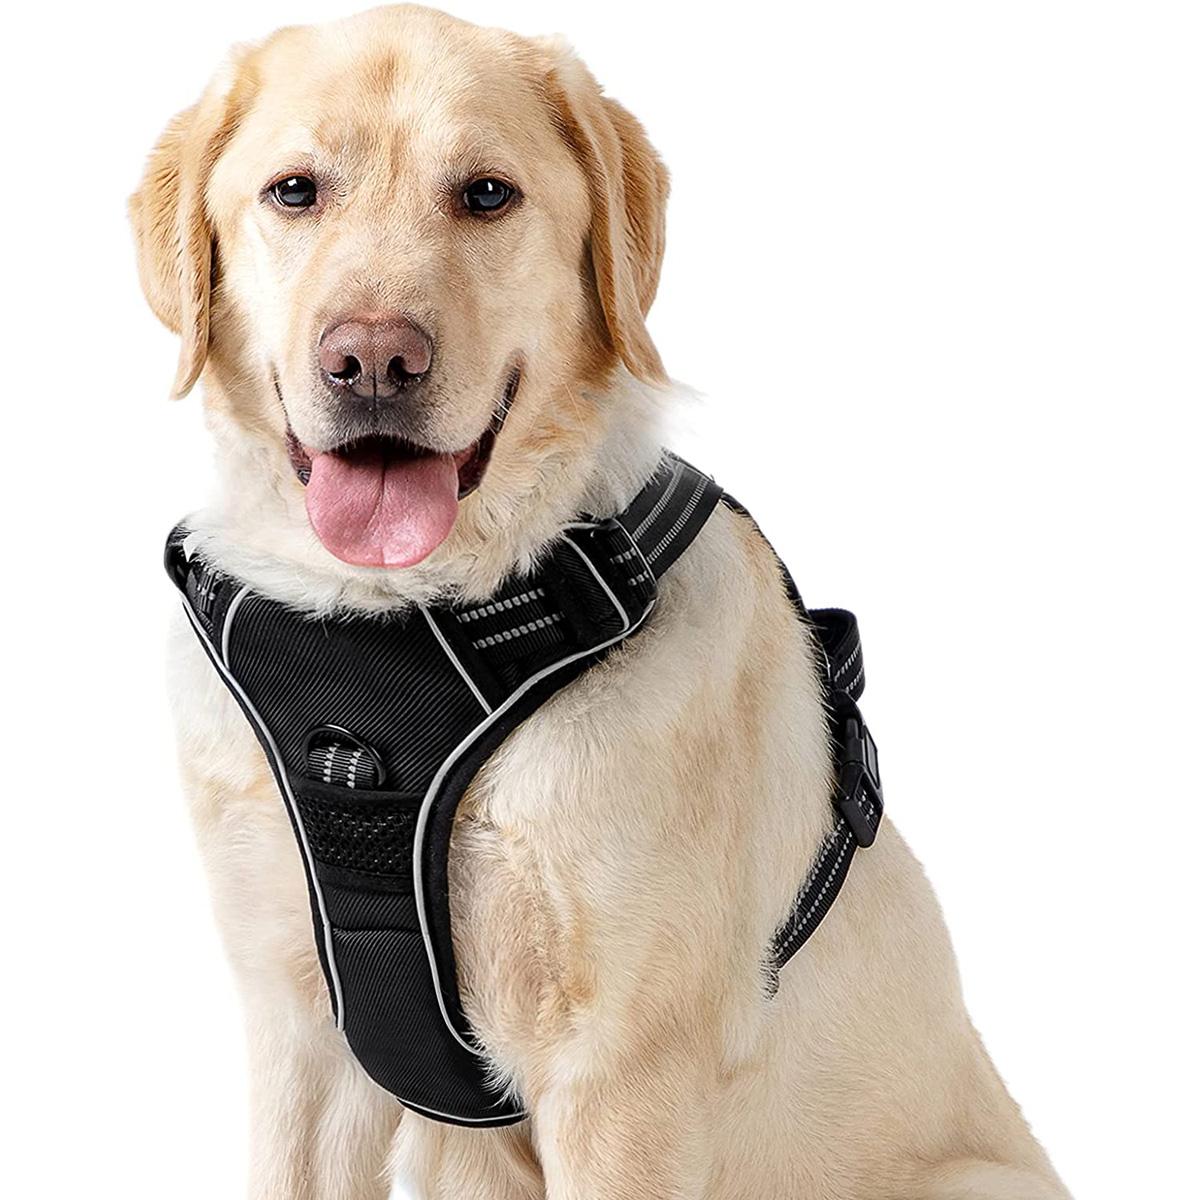 Lesure Dog Harness with Easy Control Handle for Dogs for $6.39